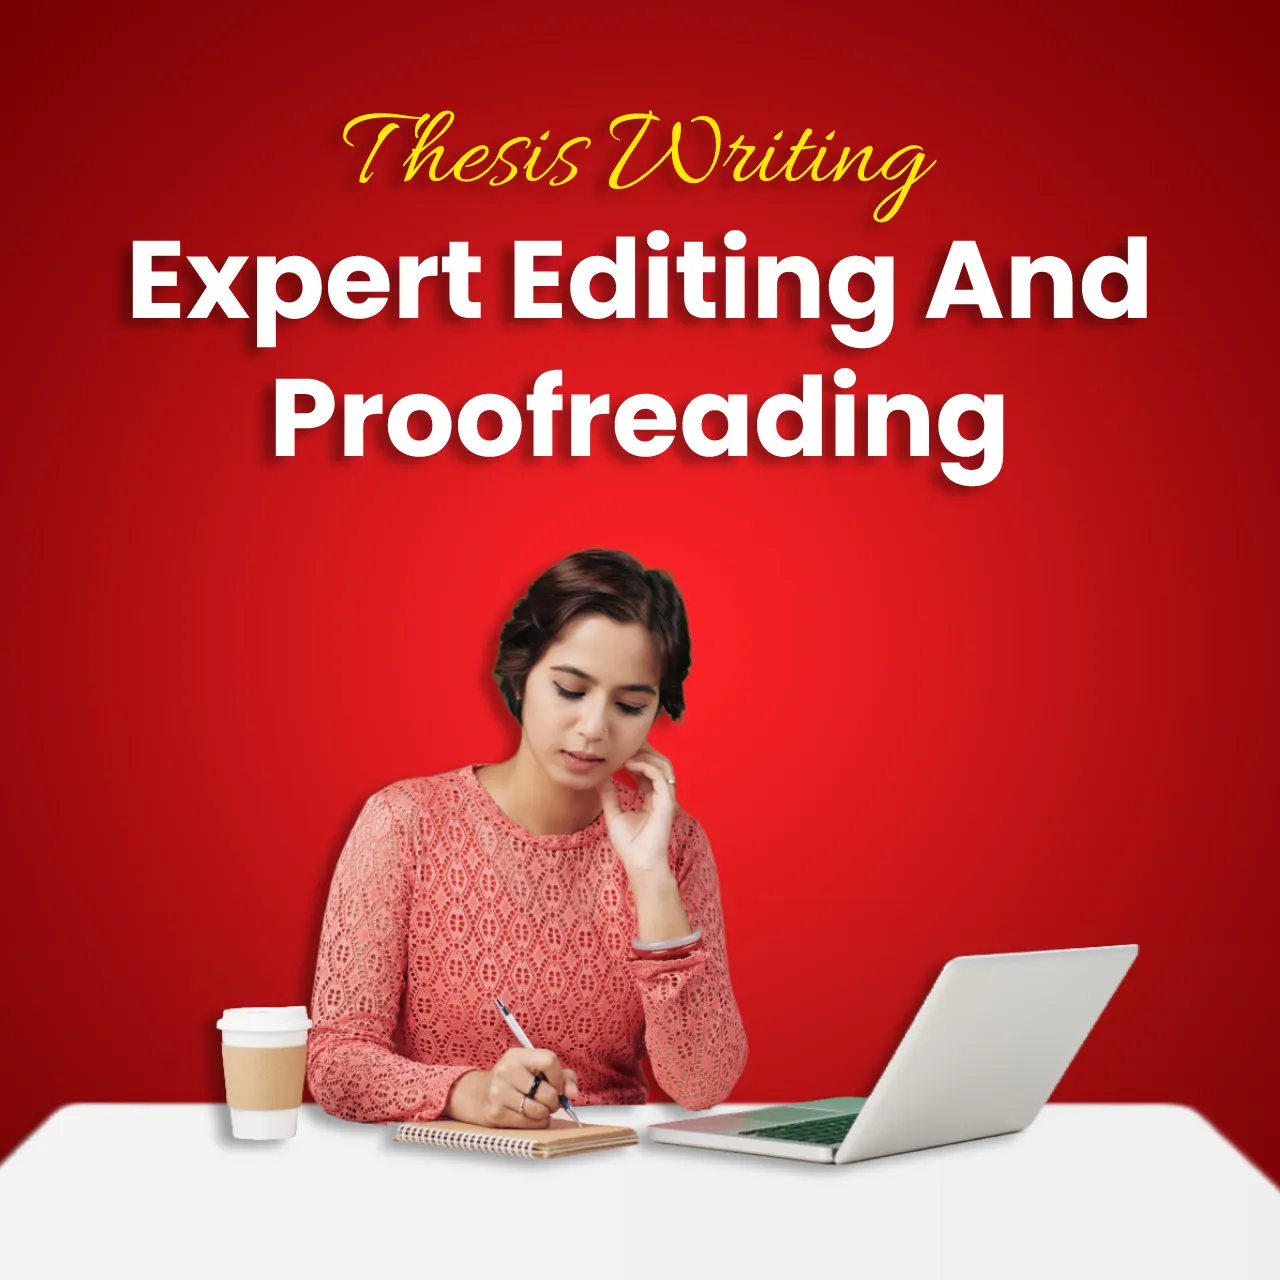 proofreading in thesis